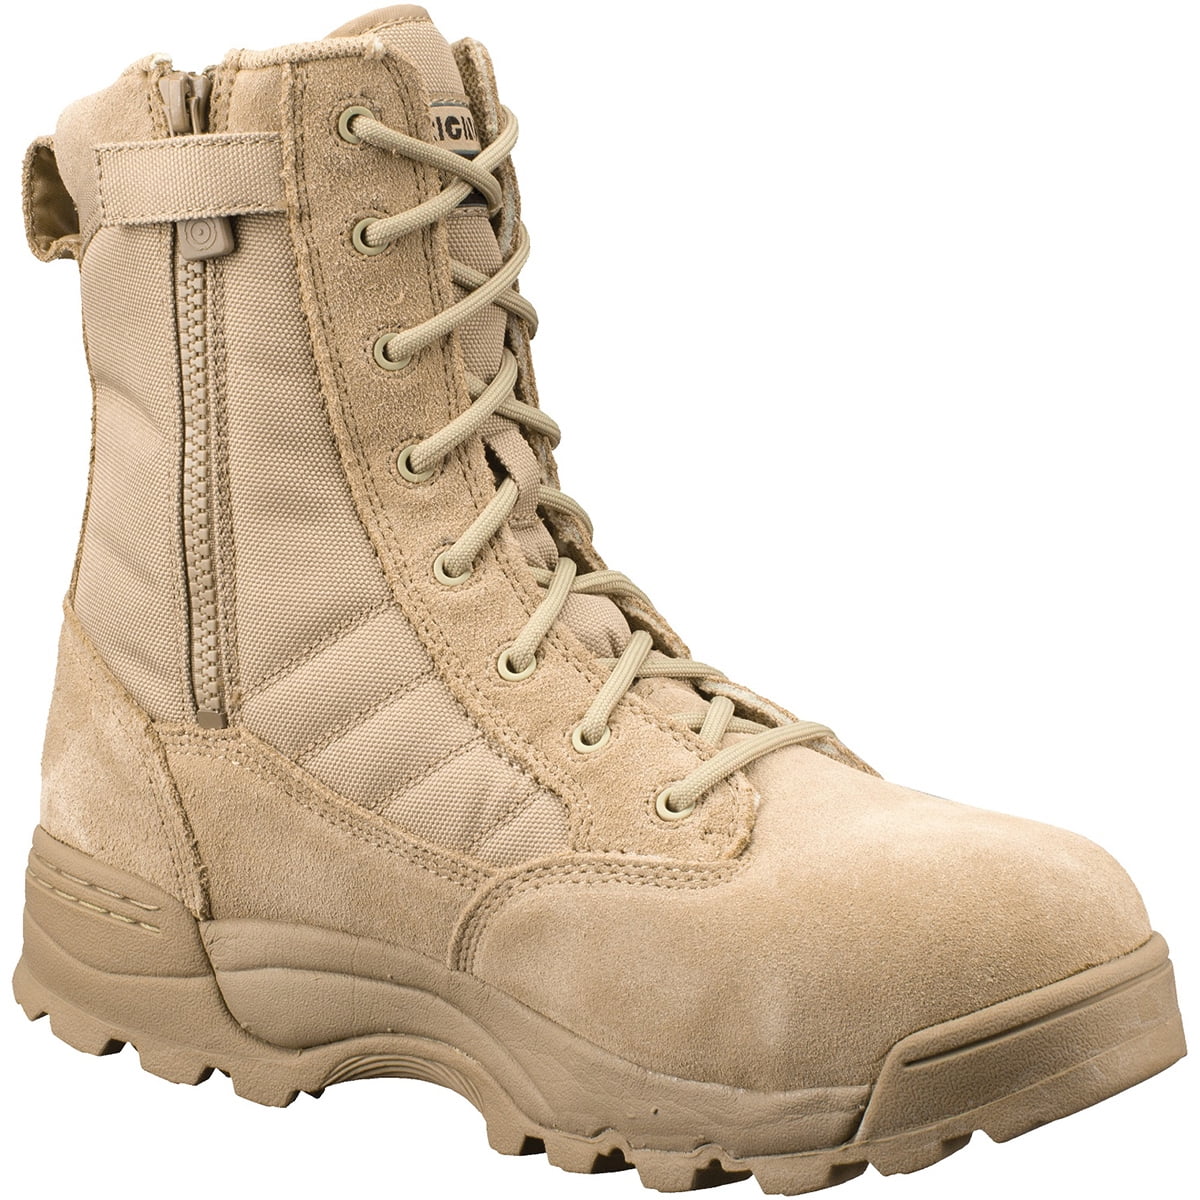 TAS TACTICAL ELITE SECURITY BOOTS WITH SIDE ZIP 